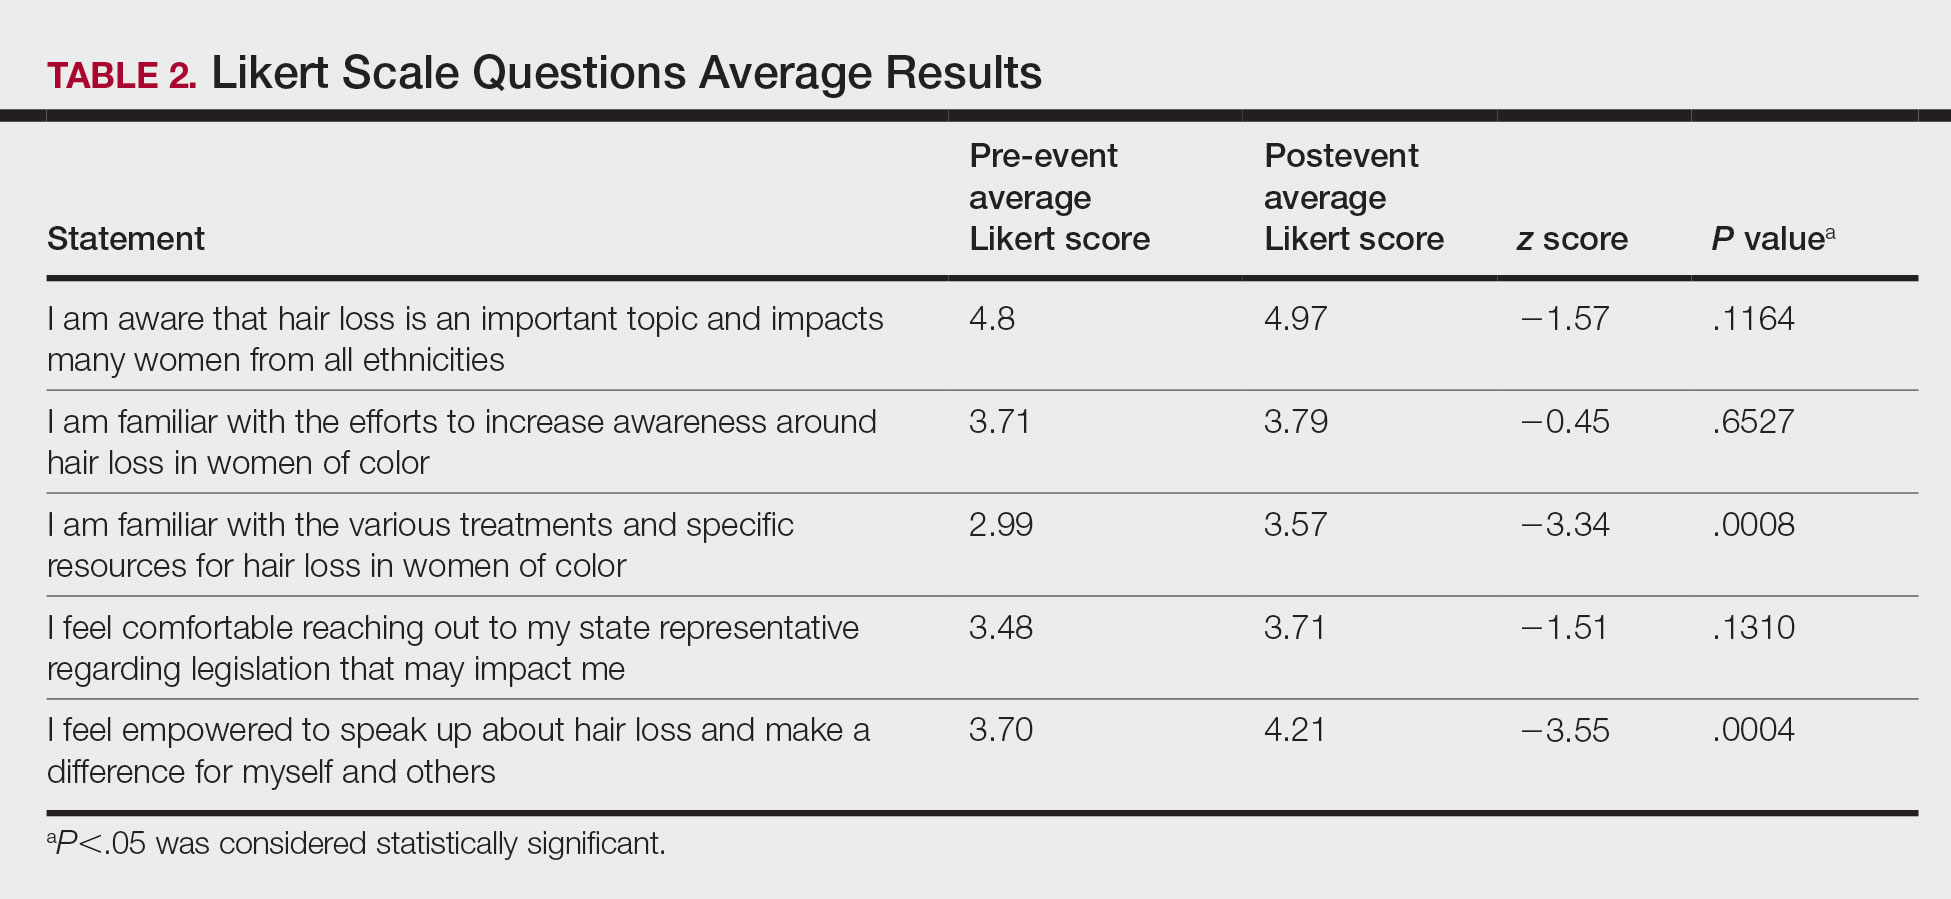 Likert Scale Questions Average Results